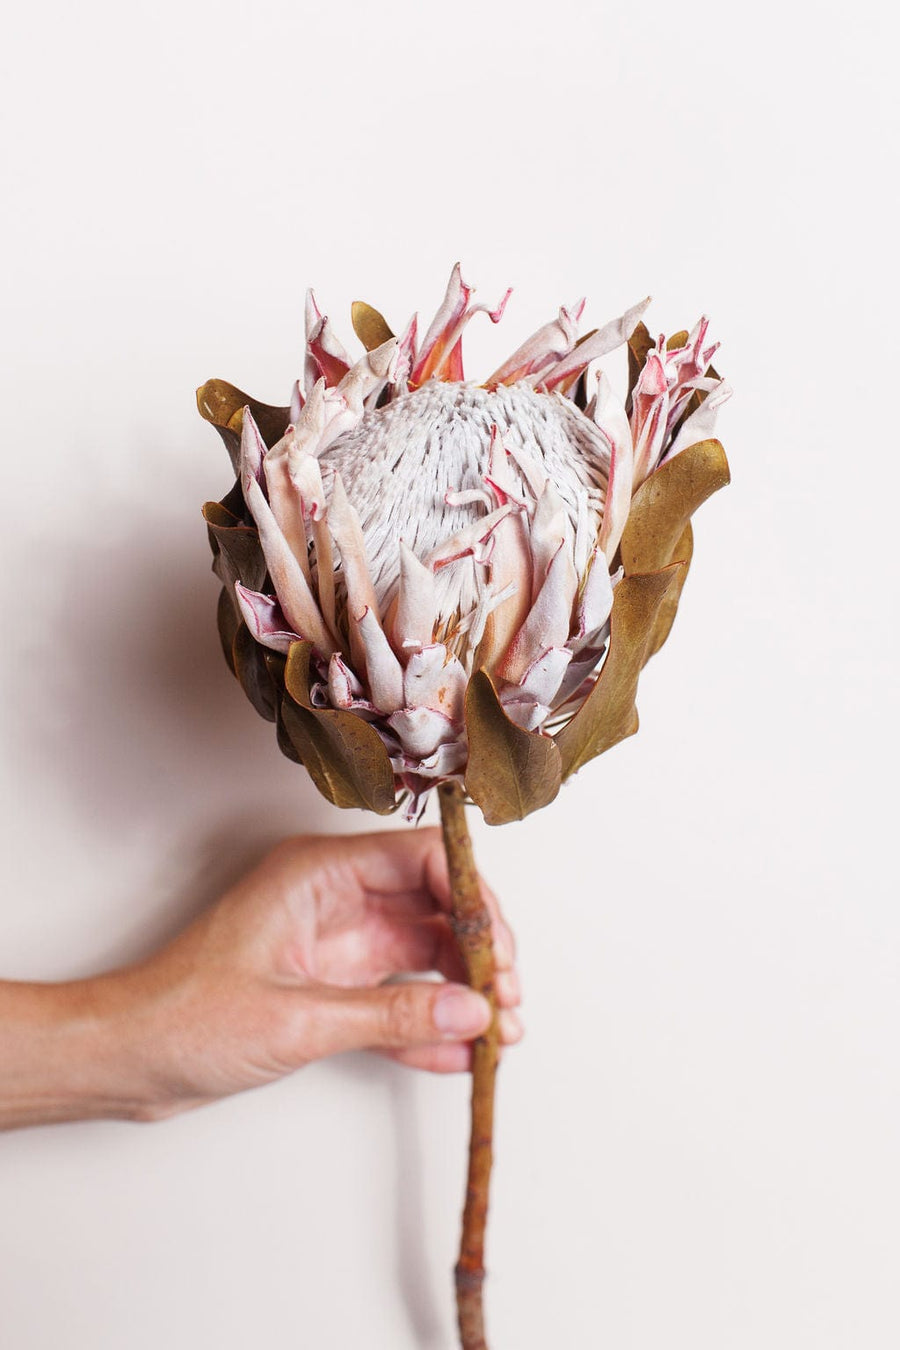 Idlewild Floral Co. Bunches Single Dried King Protea